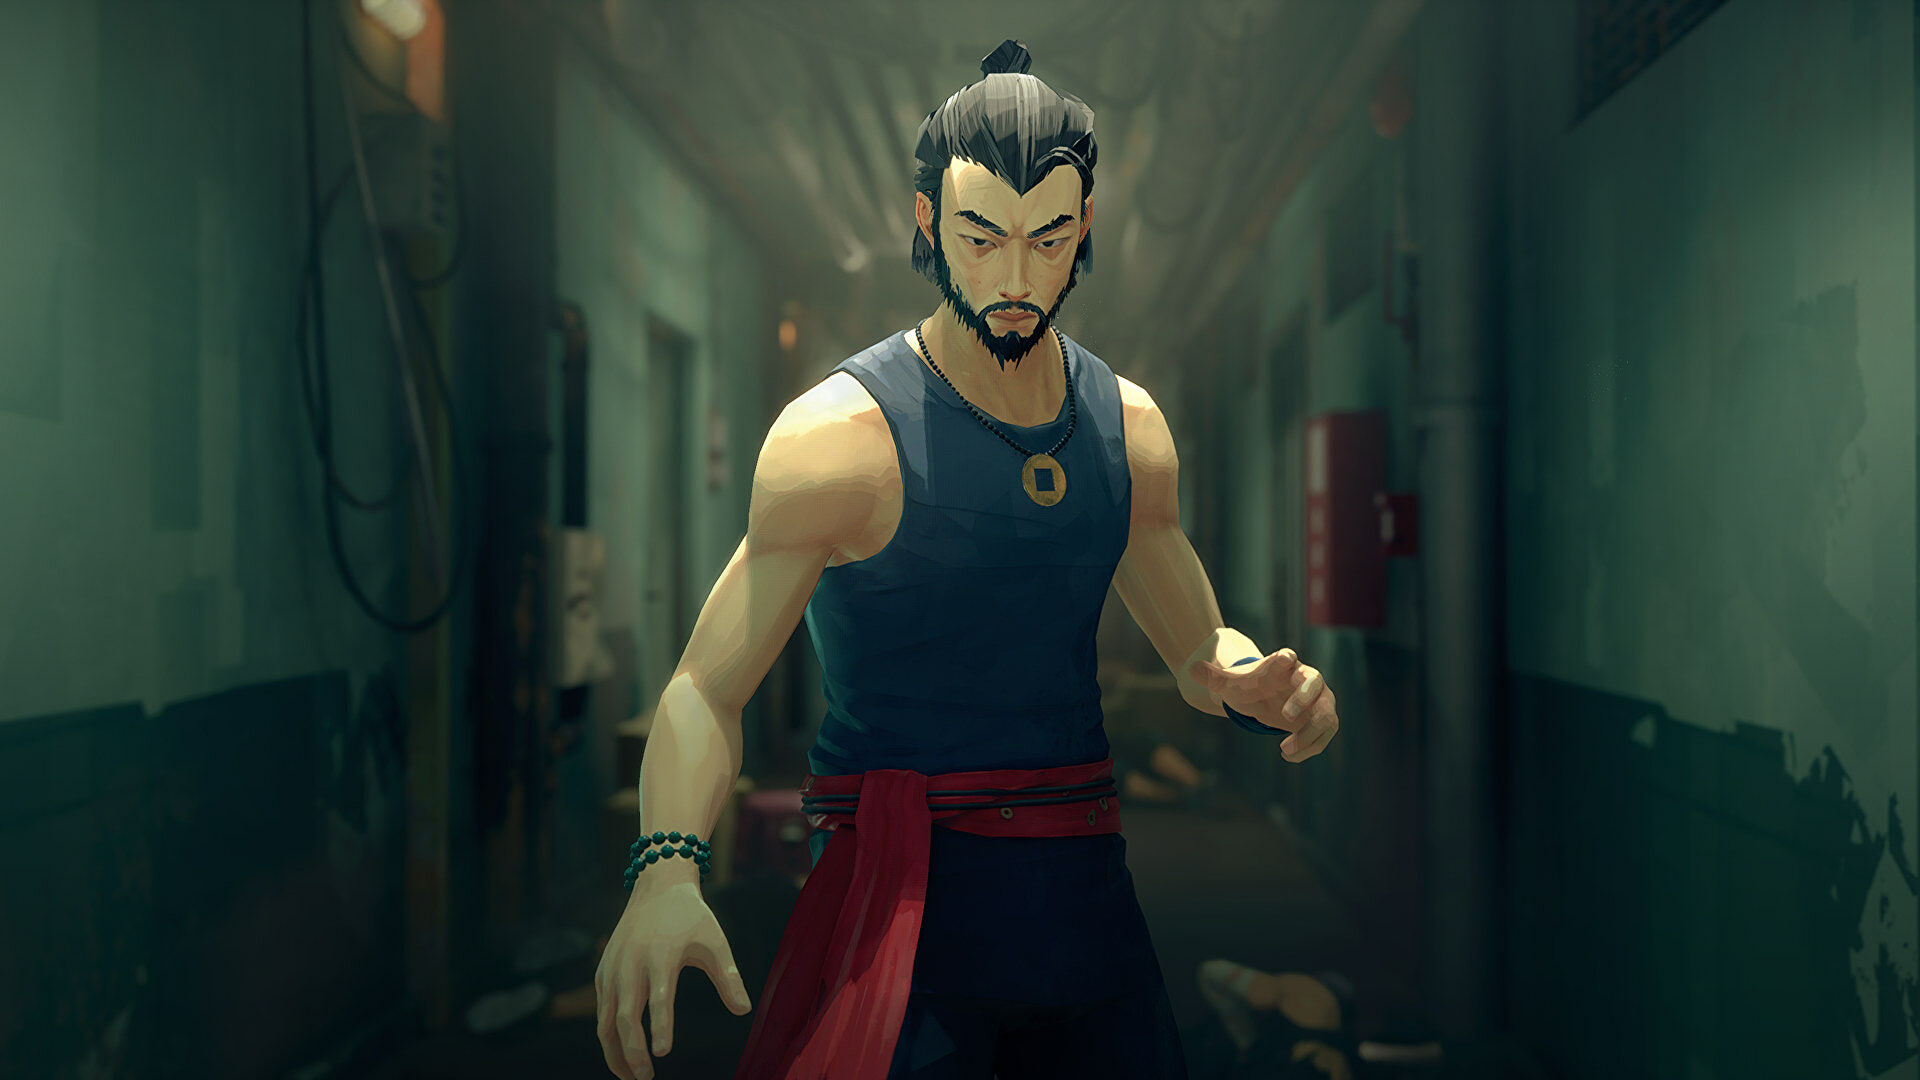 Kickpunching brawler Sifu is coming to Steam in March